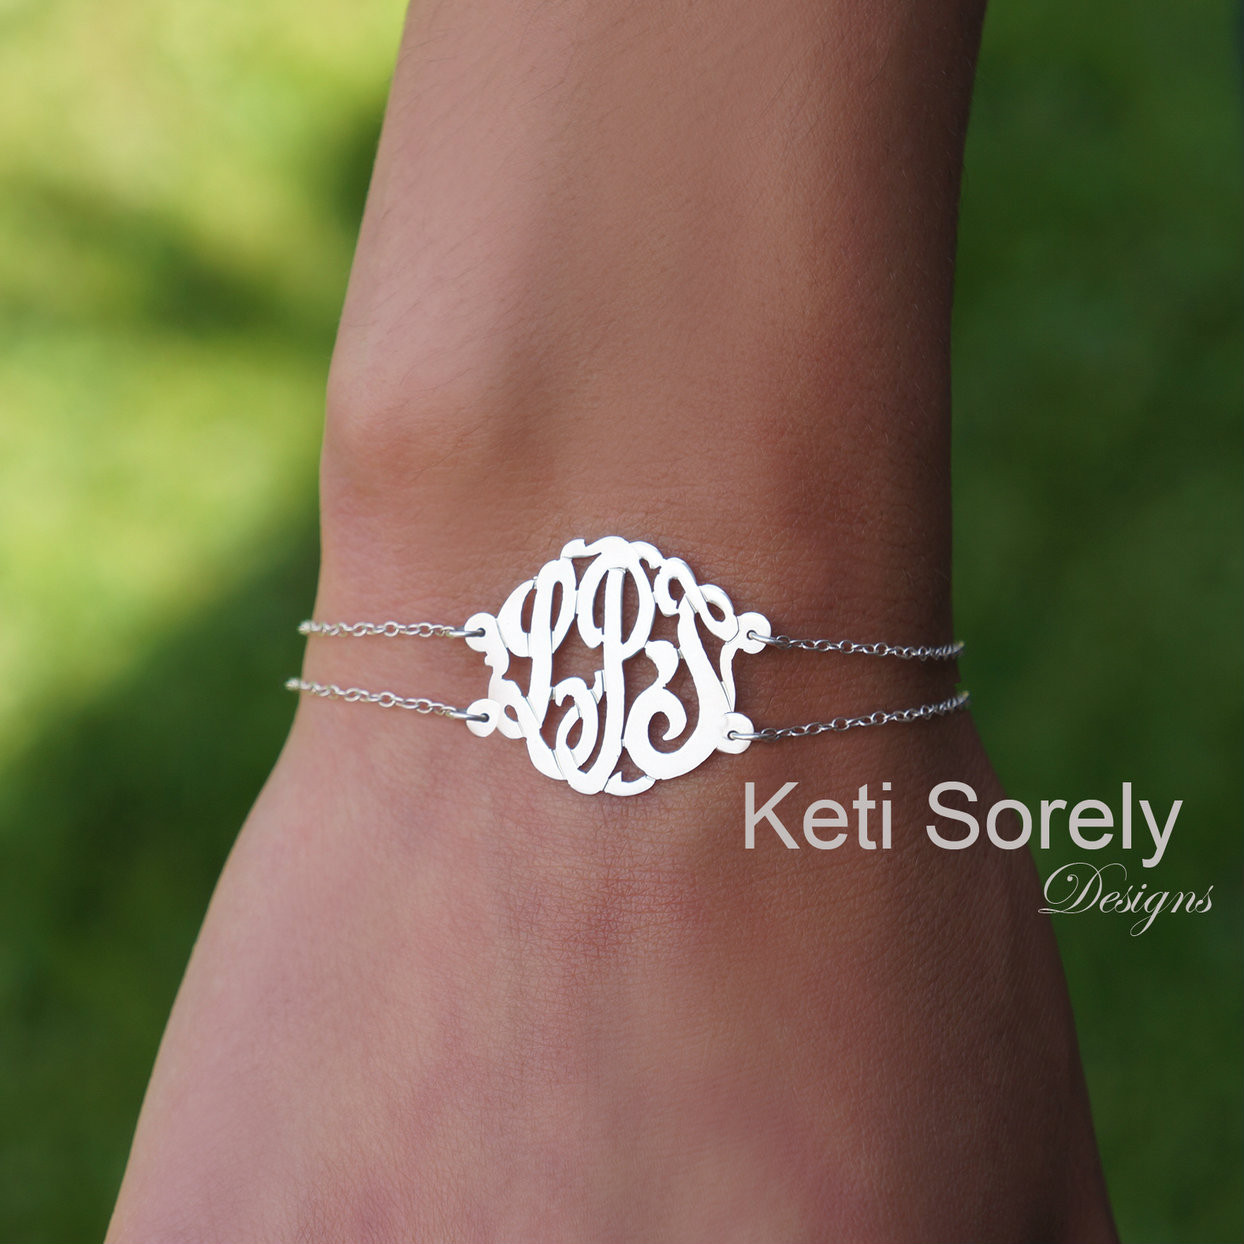 Handmade personalized monogram initials bracelet or anklet with double  chain. Order your initials in yellow, rose or white gold